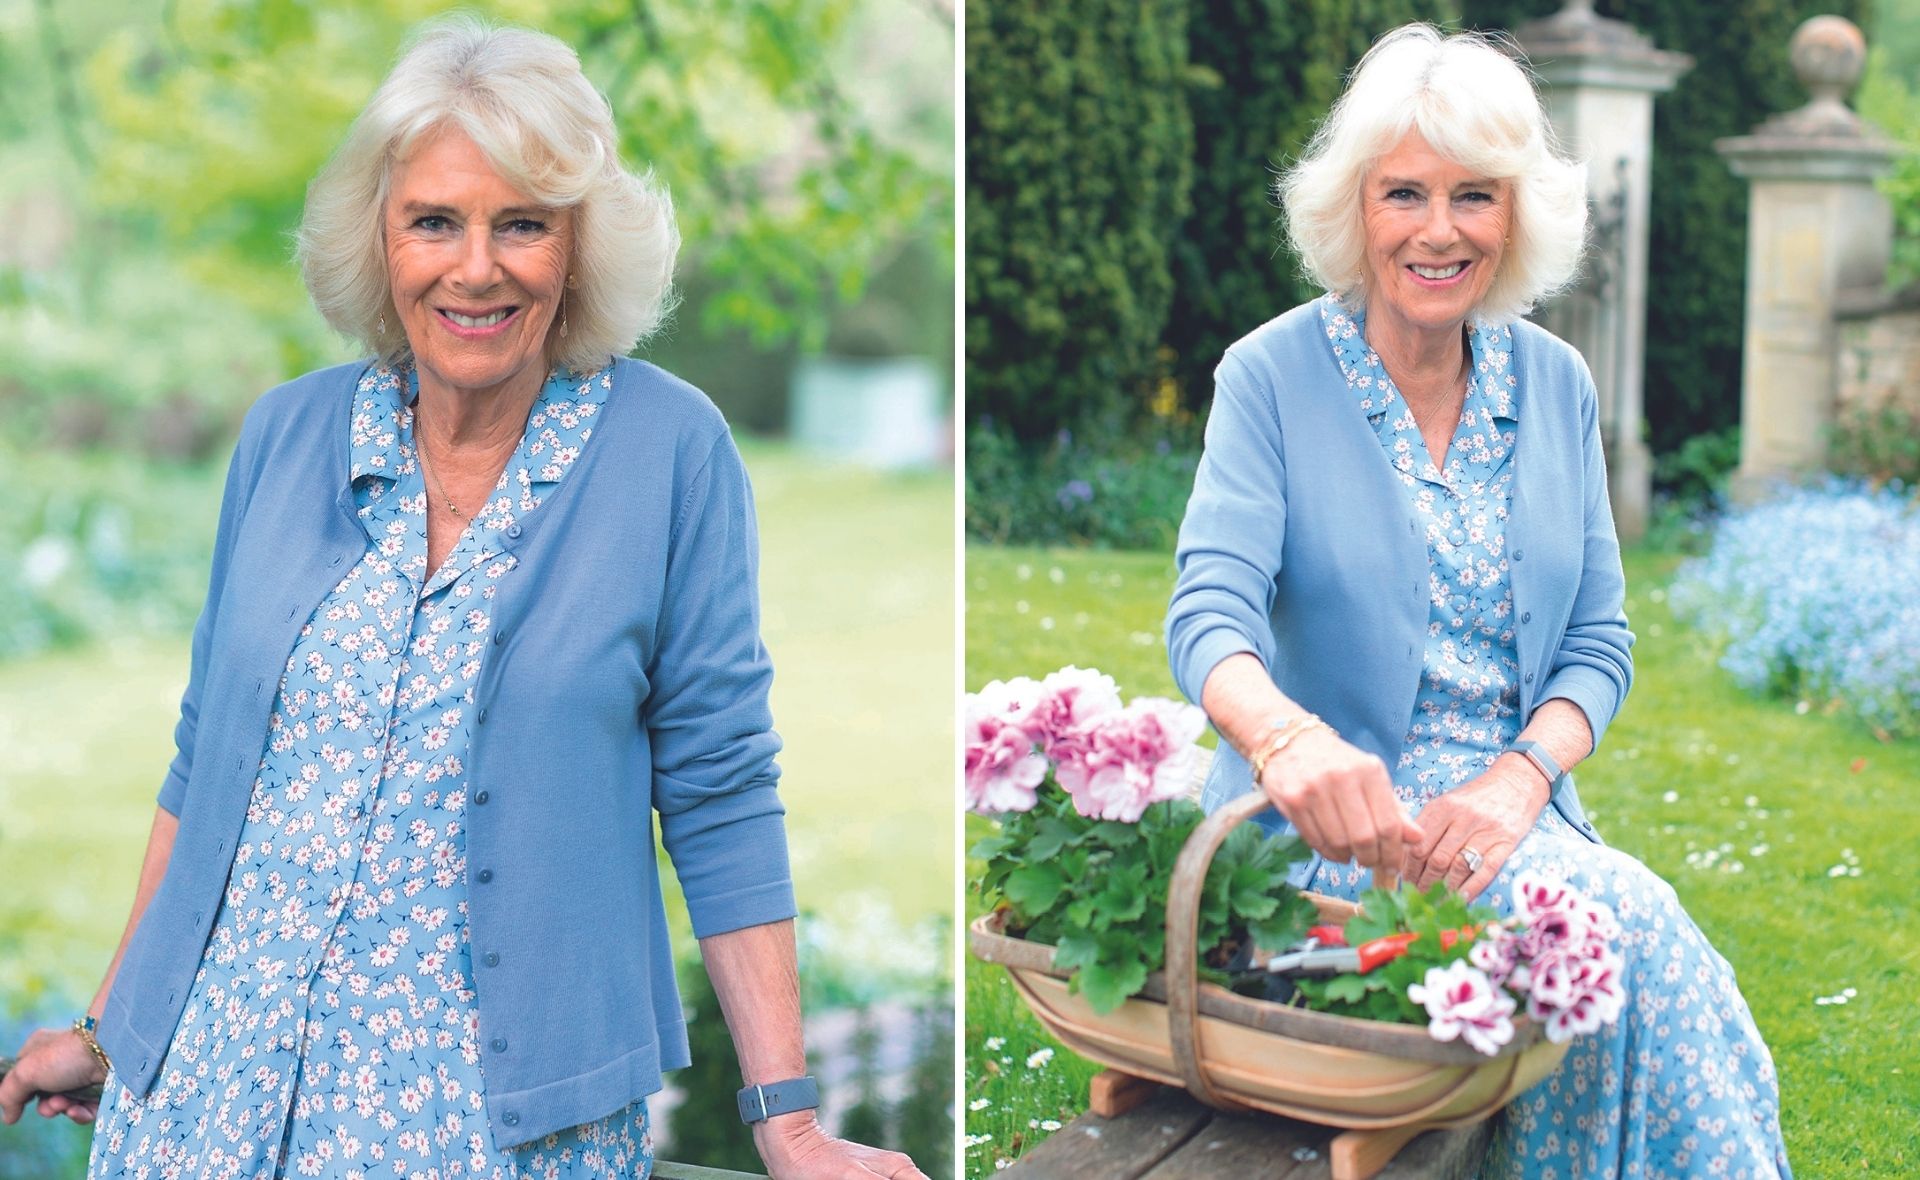 EXCLUSIVE: As she celebrates her 75th birthday, the Duchess of Cornwall talks to The Weekly about her simple country childhood, losing her mother, lessons from Prince Philip, why speeches terrify her and becoming Queen Consort